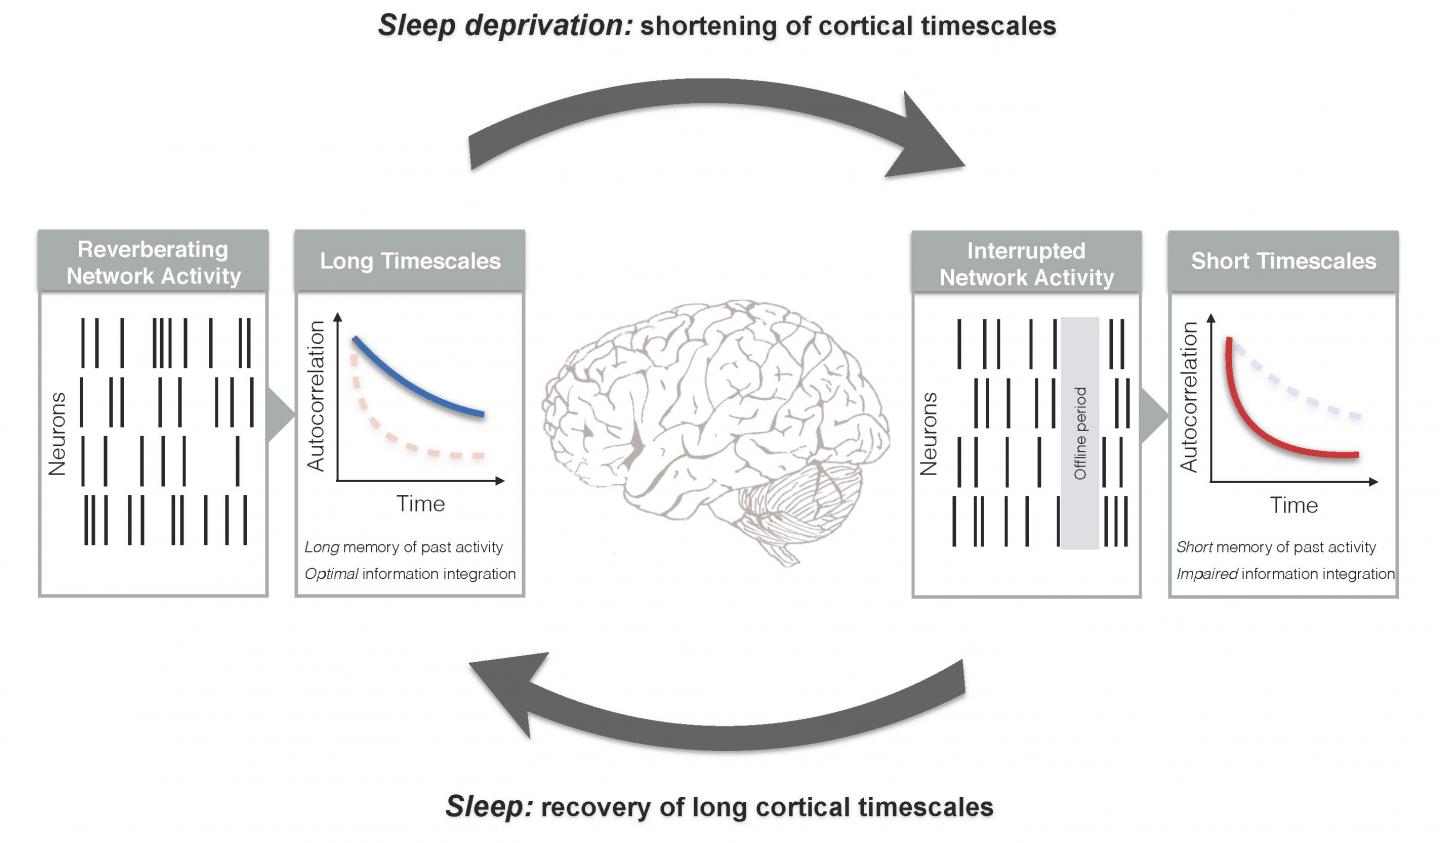 Cortical Timescales